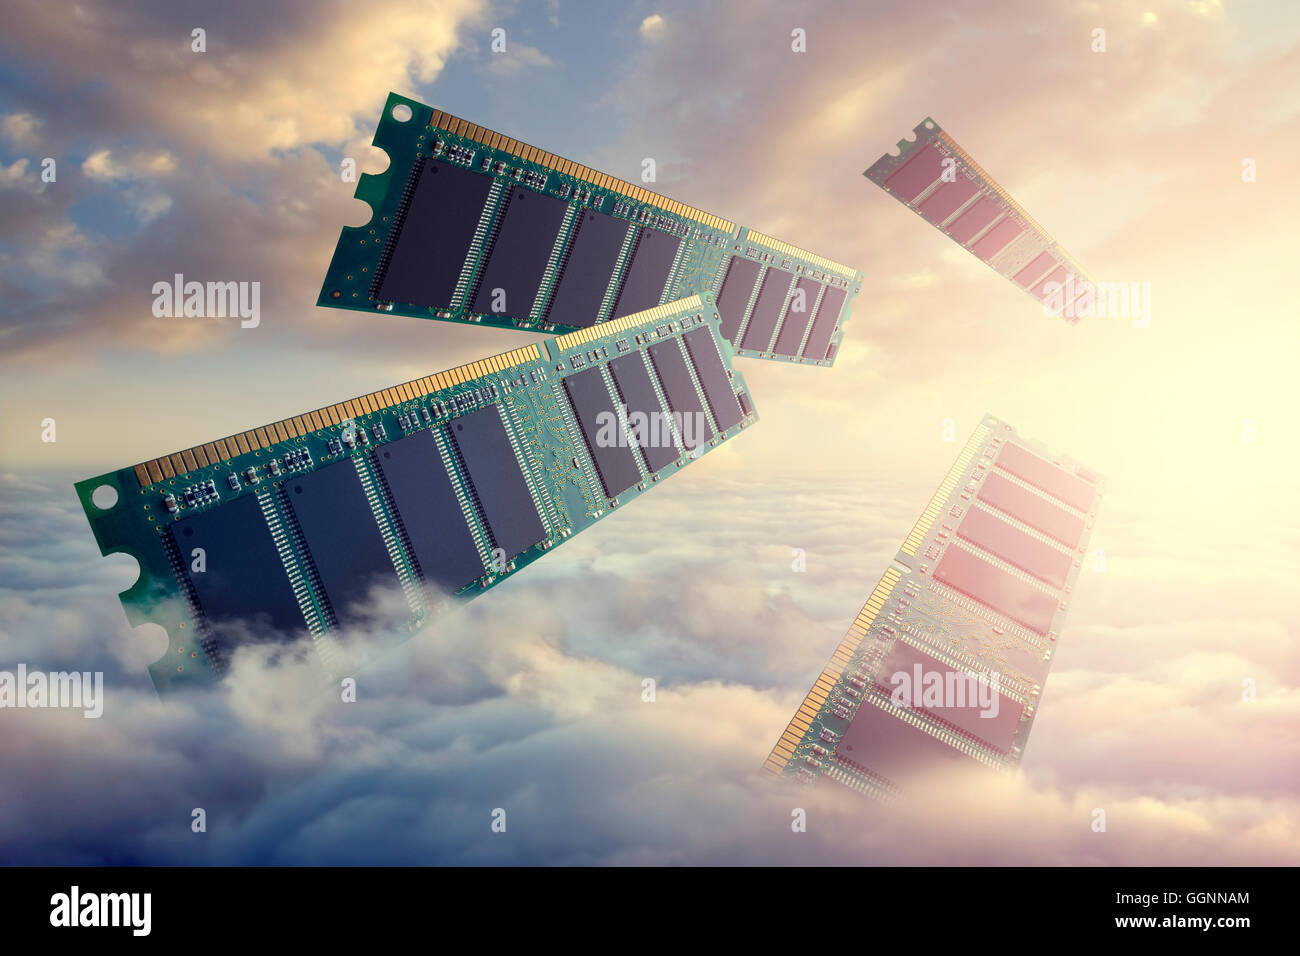 RAM modules floating above clouds Stock Photo